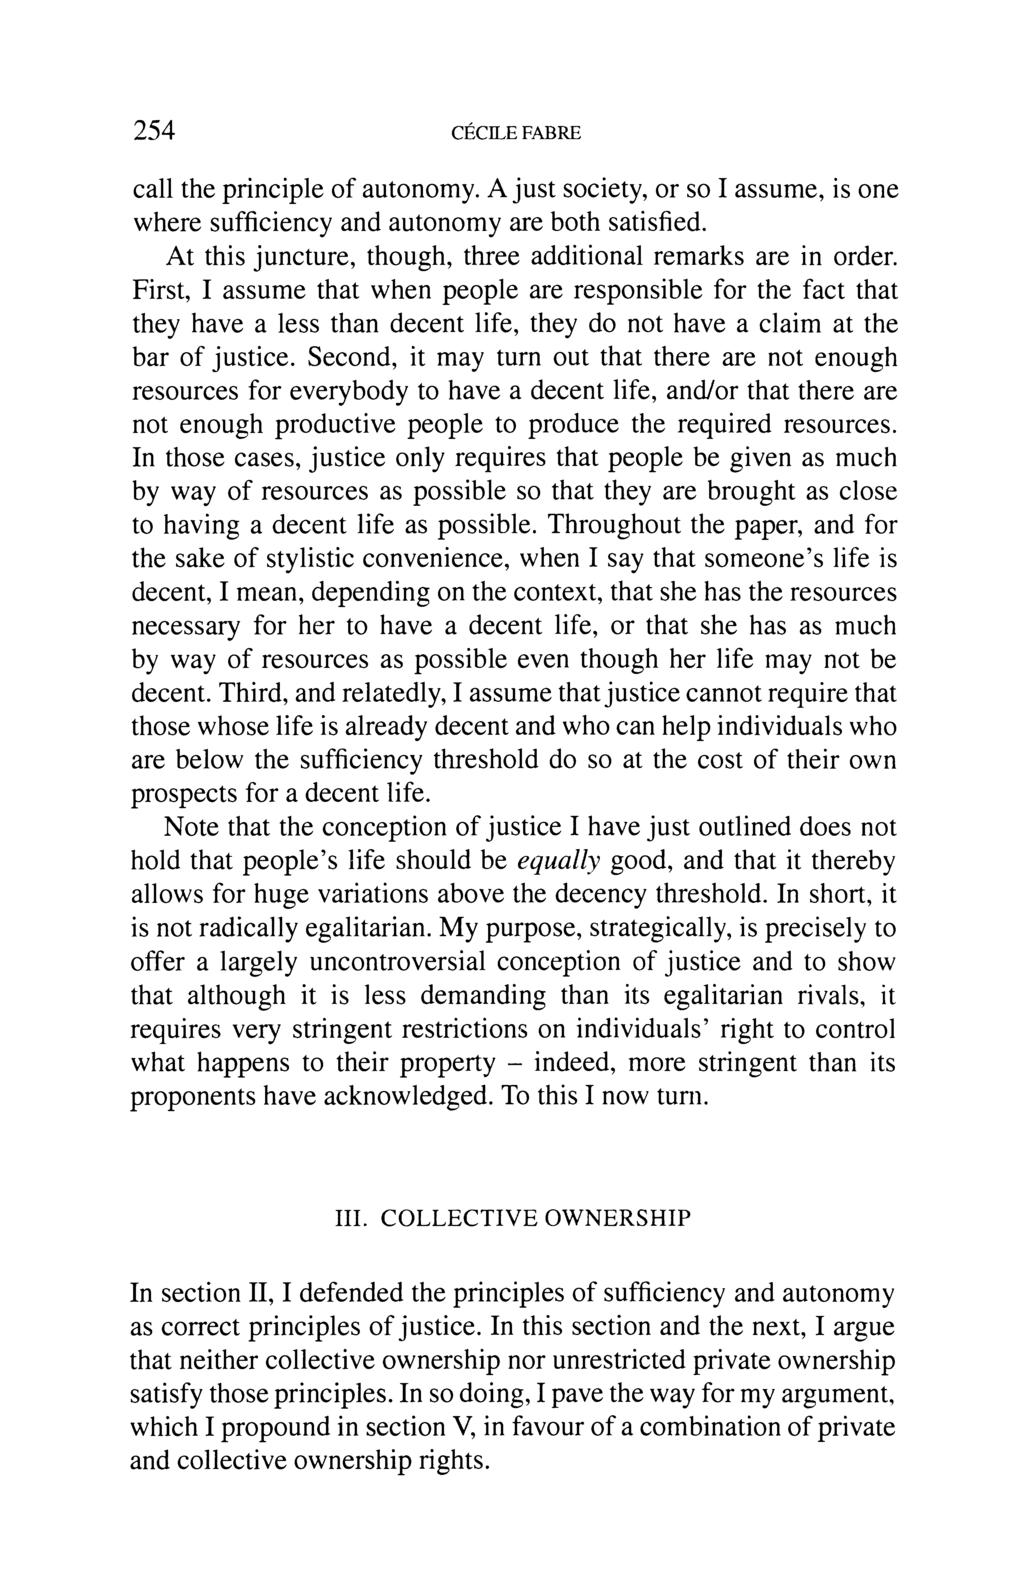 254 CECILE FABRE call the principle of autonomy. A just society, or so I assume, is one where sufficiency and autonomy are both satisfied.